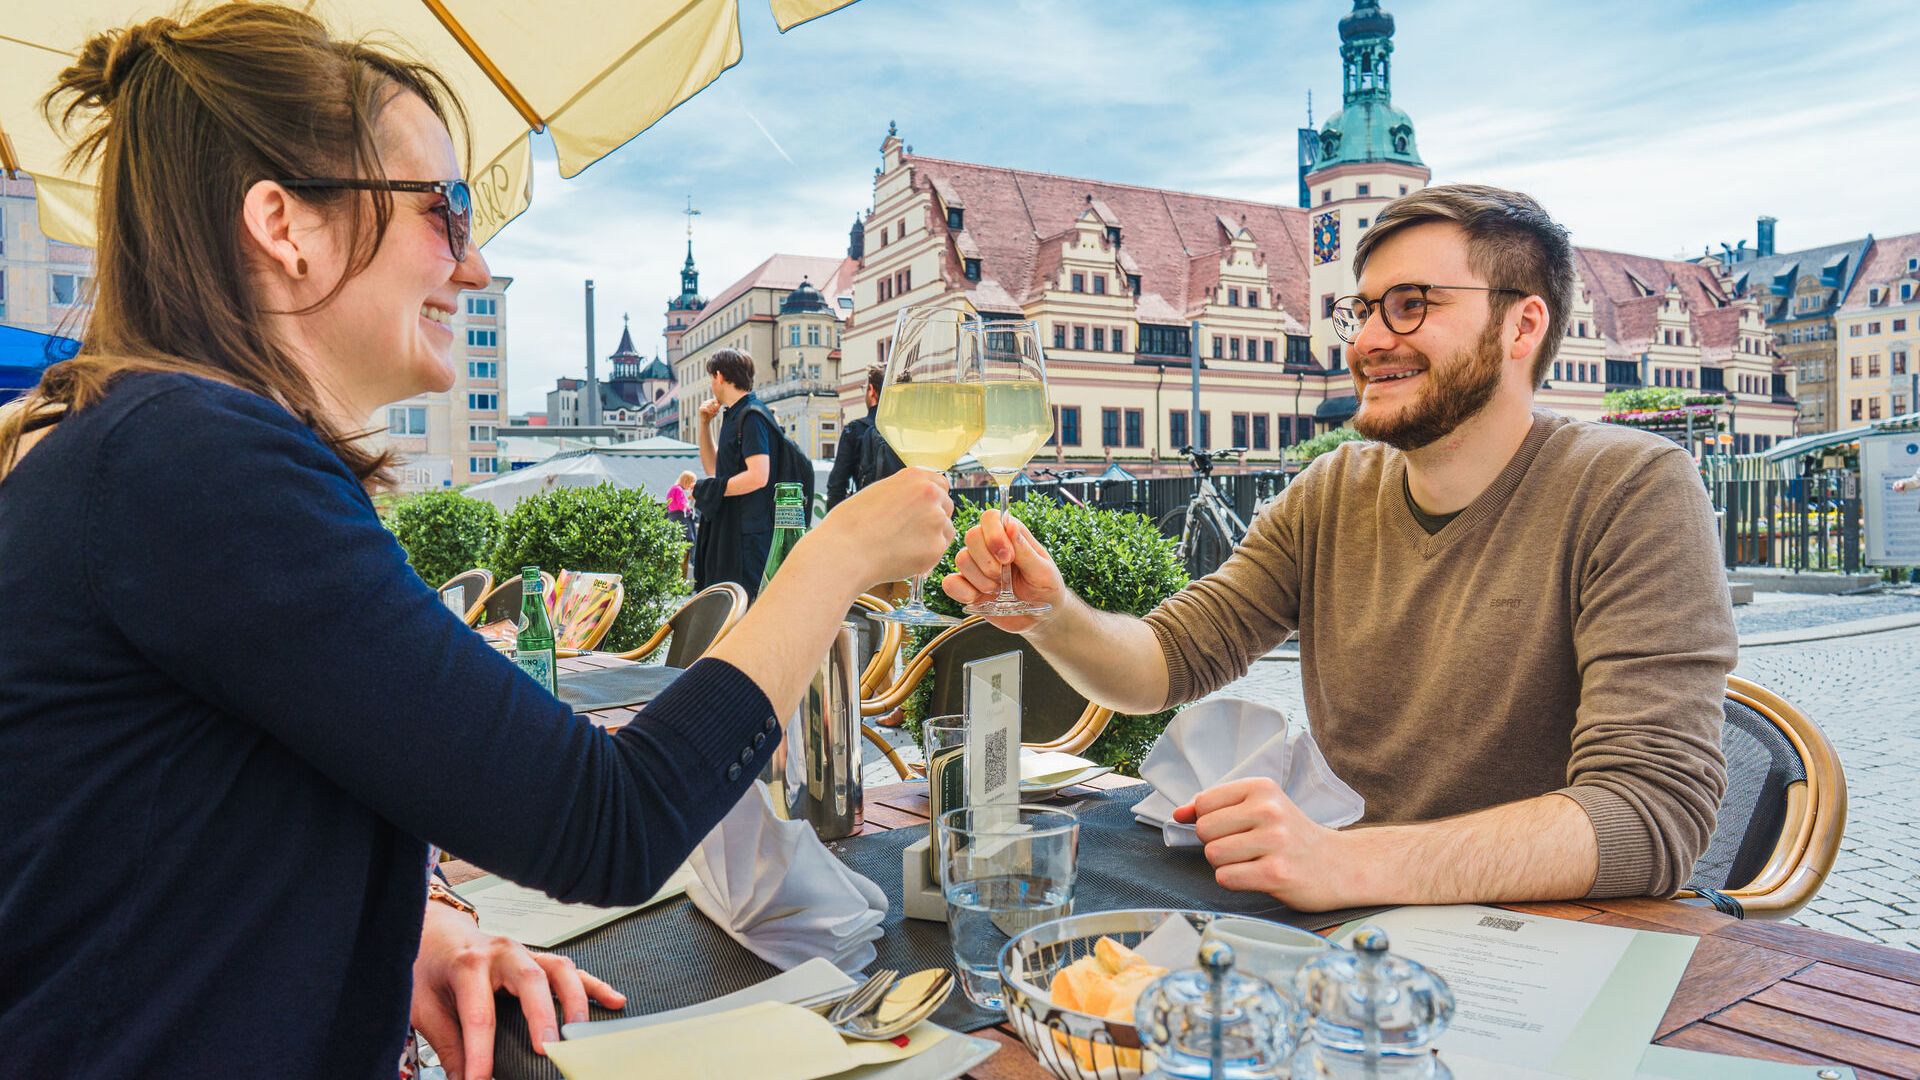 View of two guests in the outdoor seating area of the Weinstock restaurant at the edge of the market square. Restaurant, leisure time, eating out 